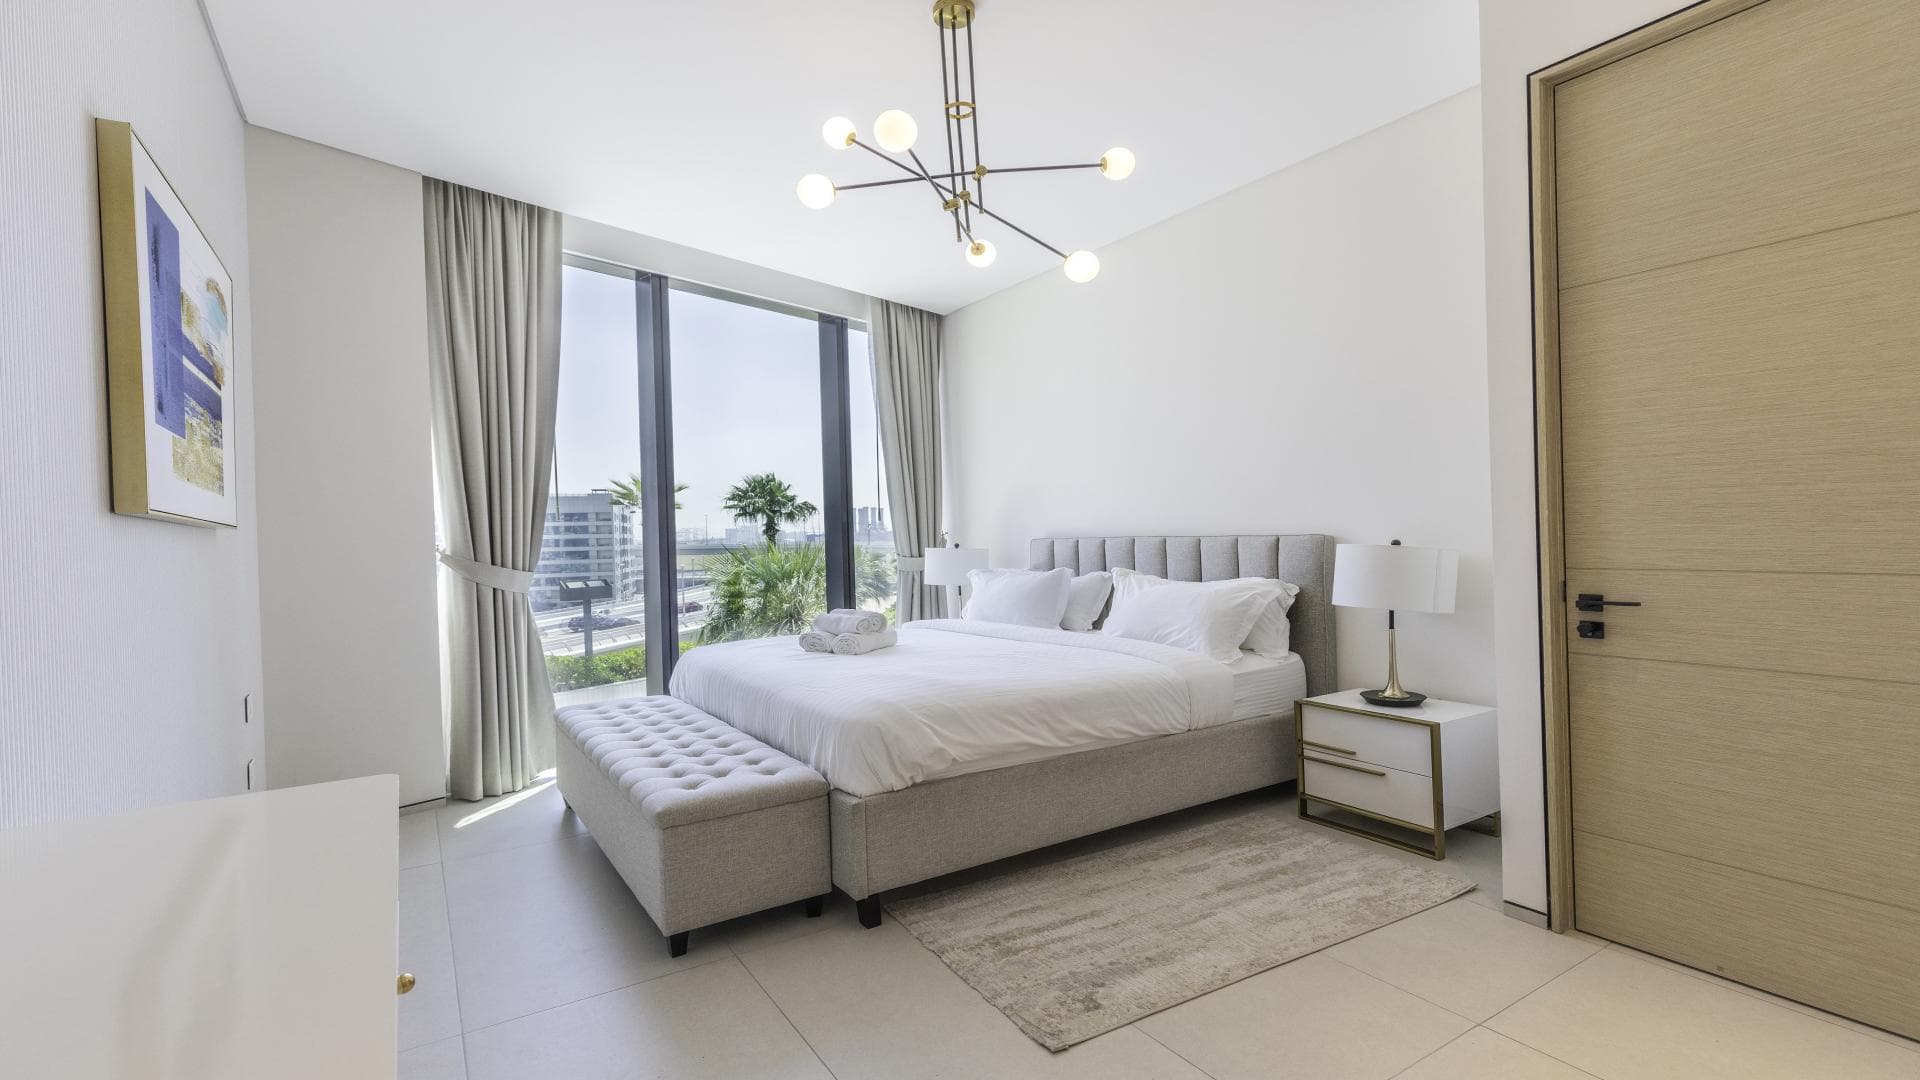 1 Bedroom Apartment For Sale The Address Jumeirah Resort And Spa Lp36575 D82cb73b8bf1.jpg